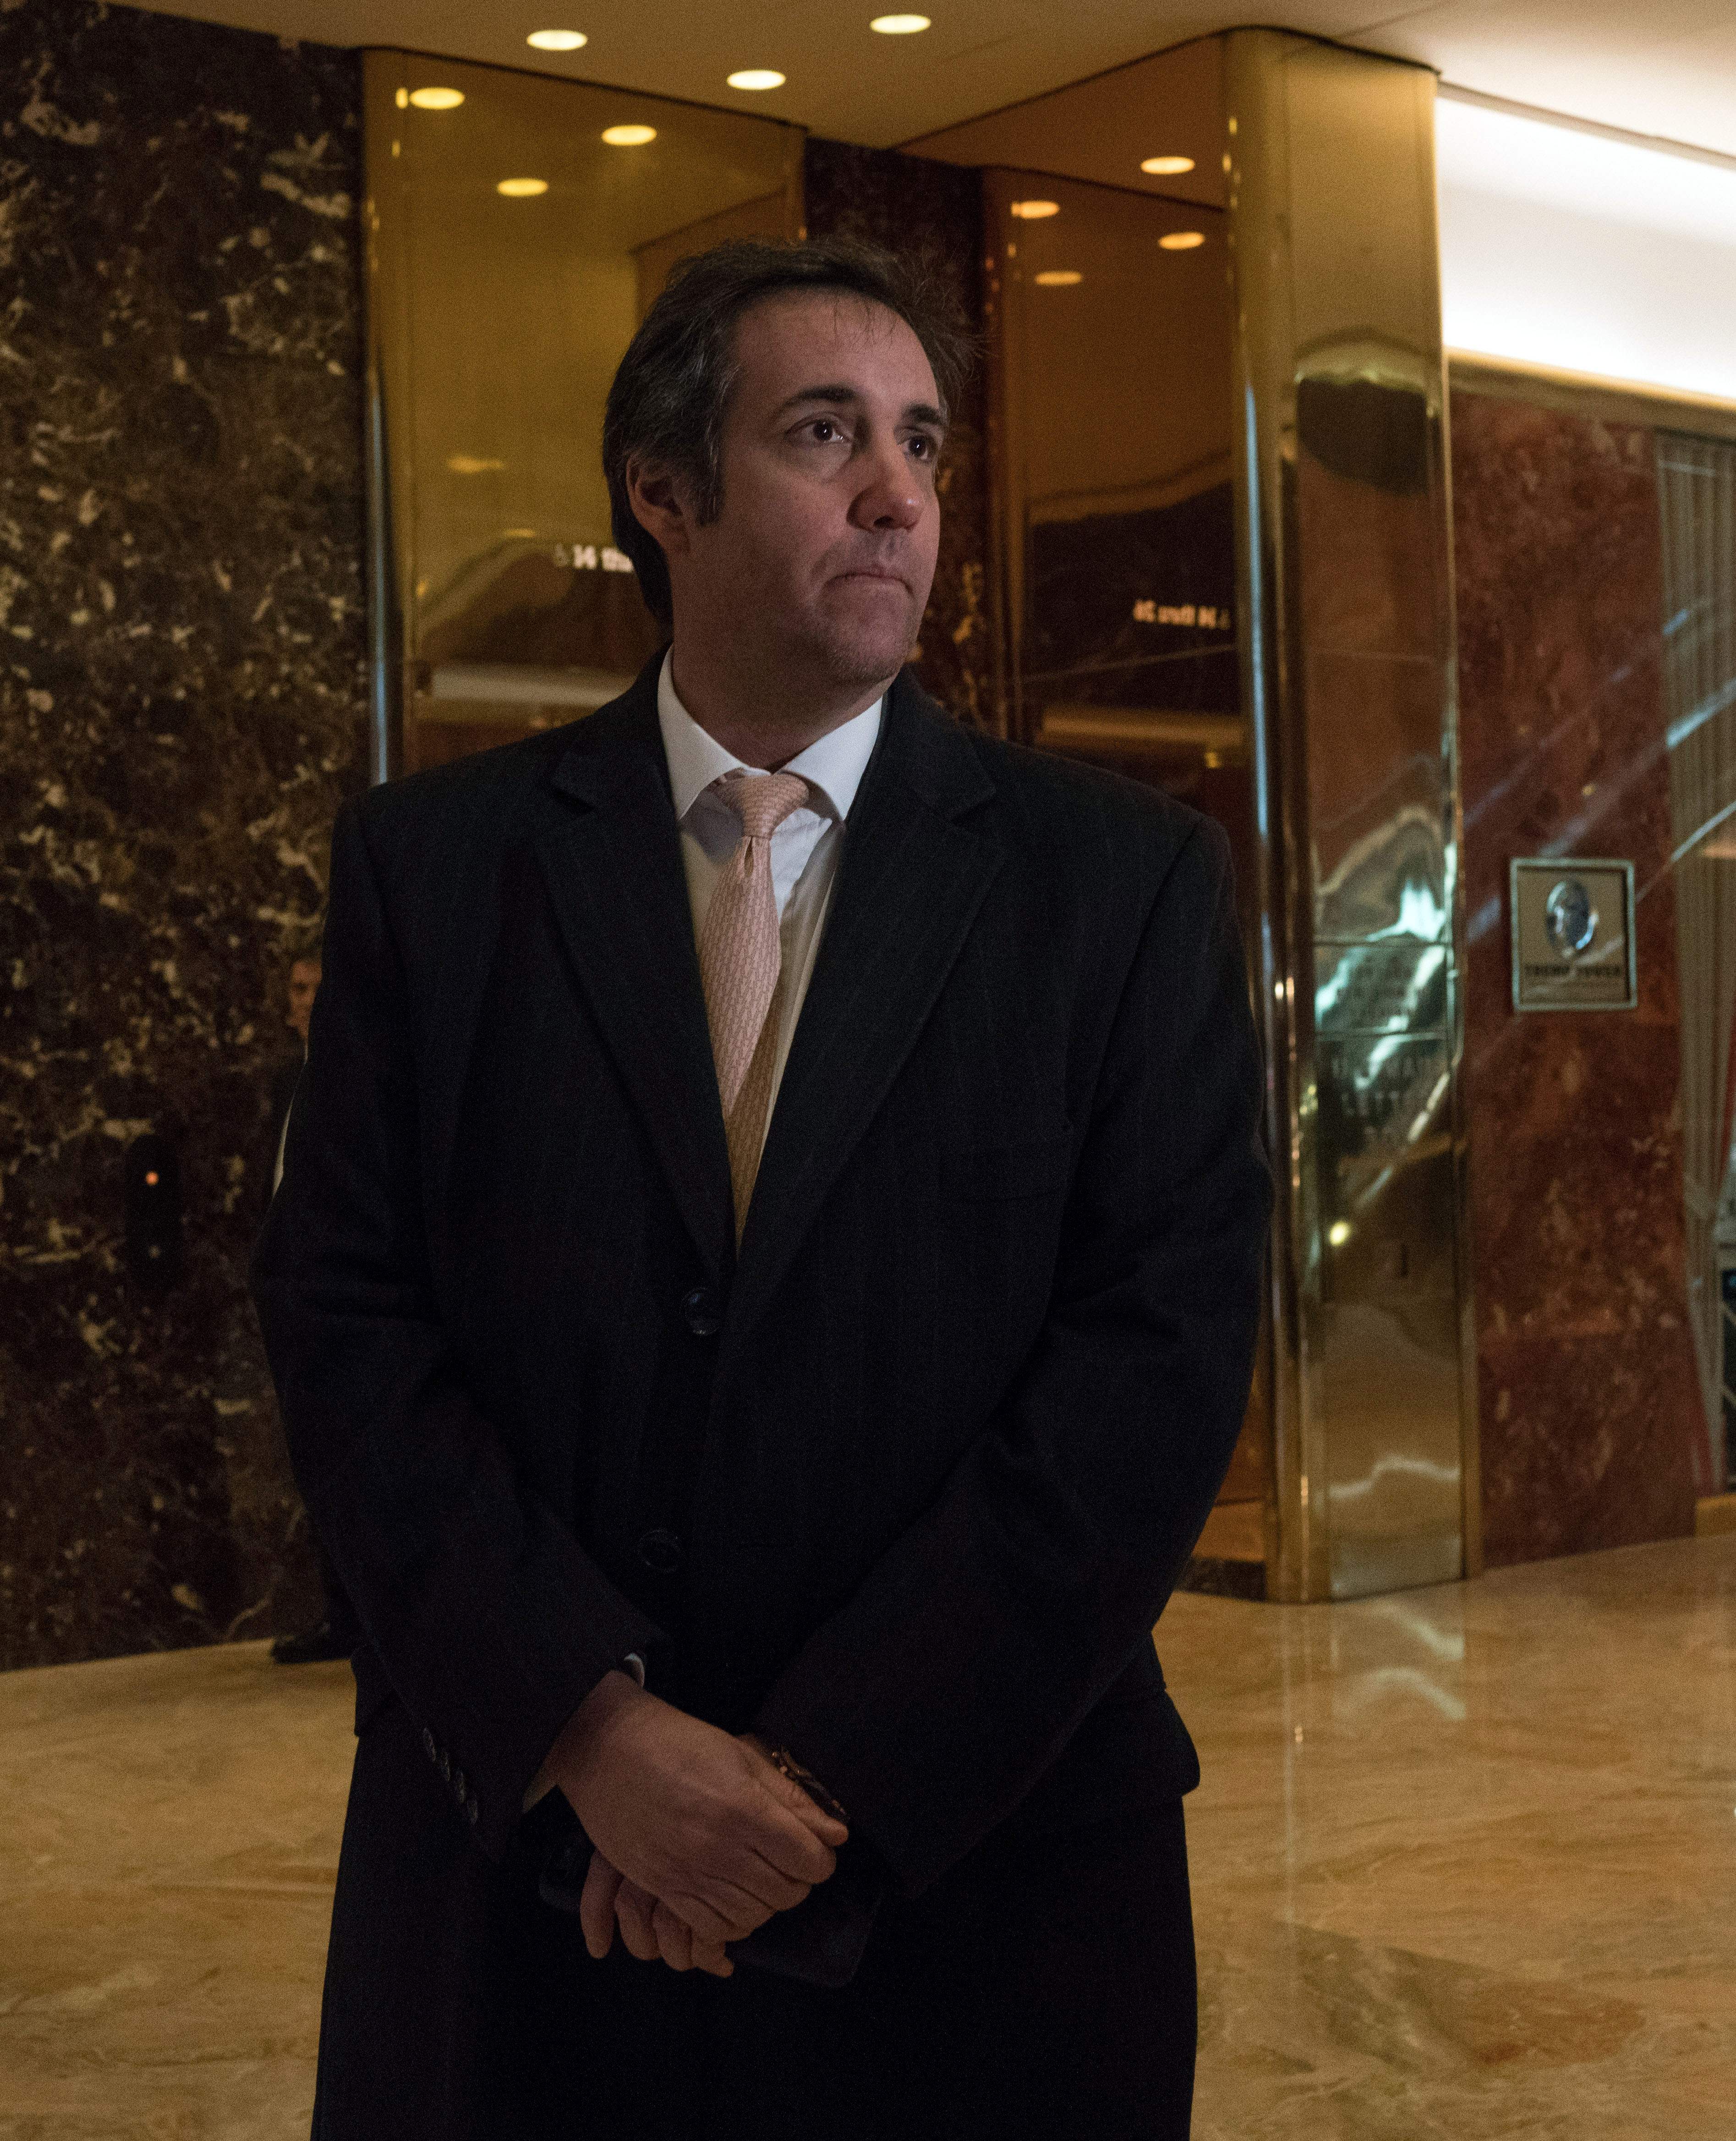 This Twitter Post From Trump's Lawyer Is A Classic Response To 'I'm Not A Racist'
